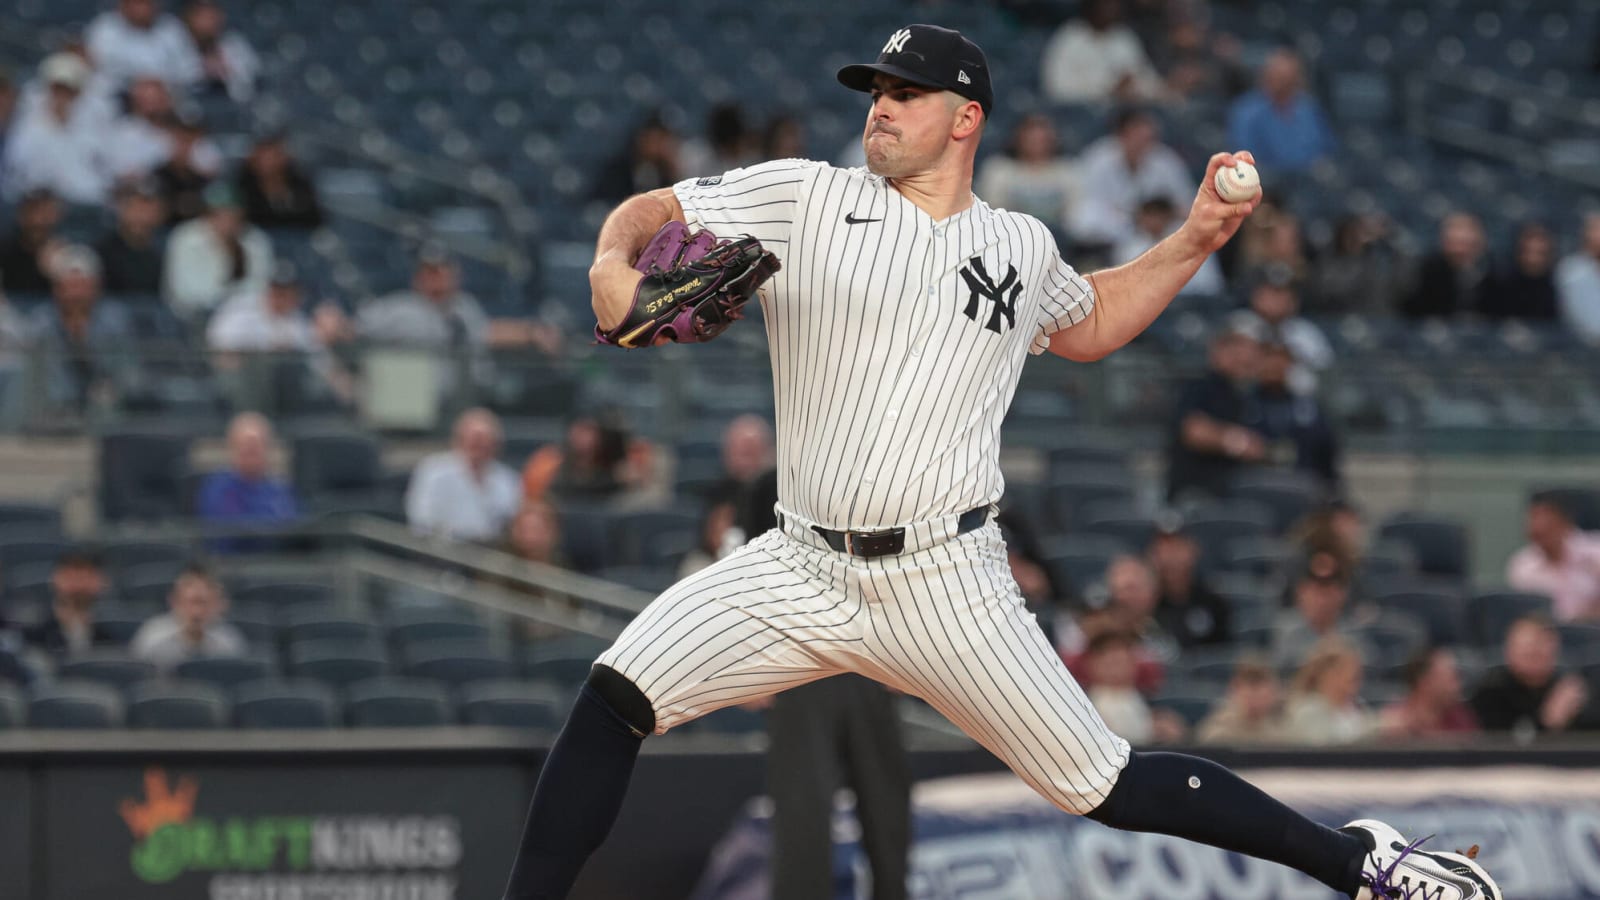 Yankees’ $162 million pitcher earns every penny in dominant start